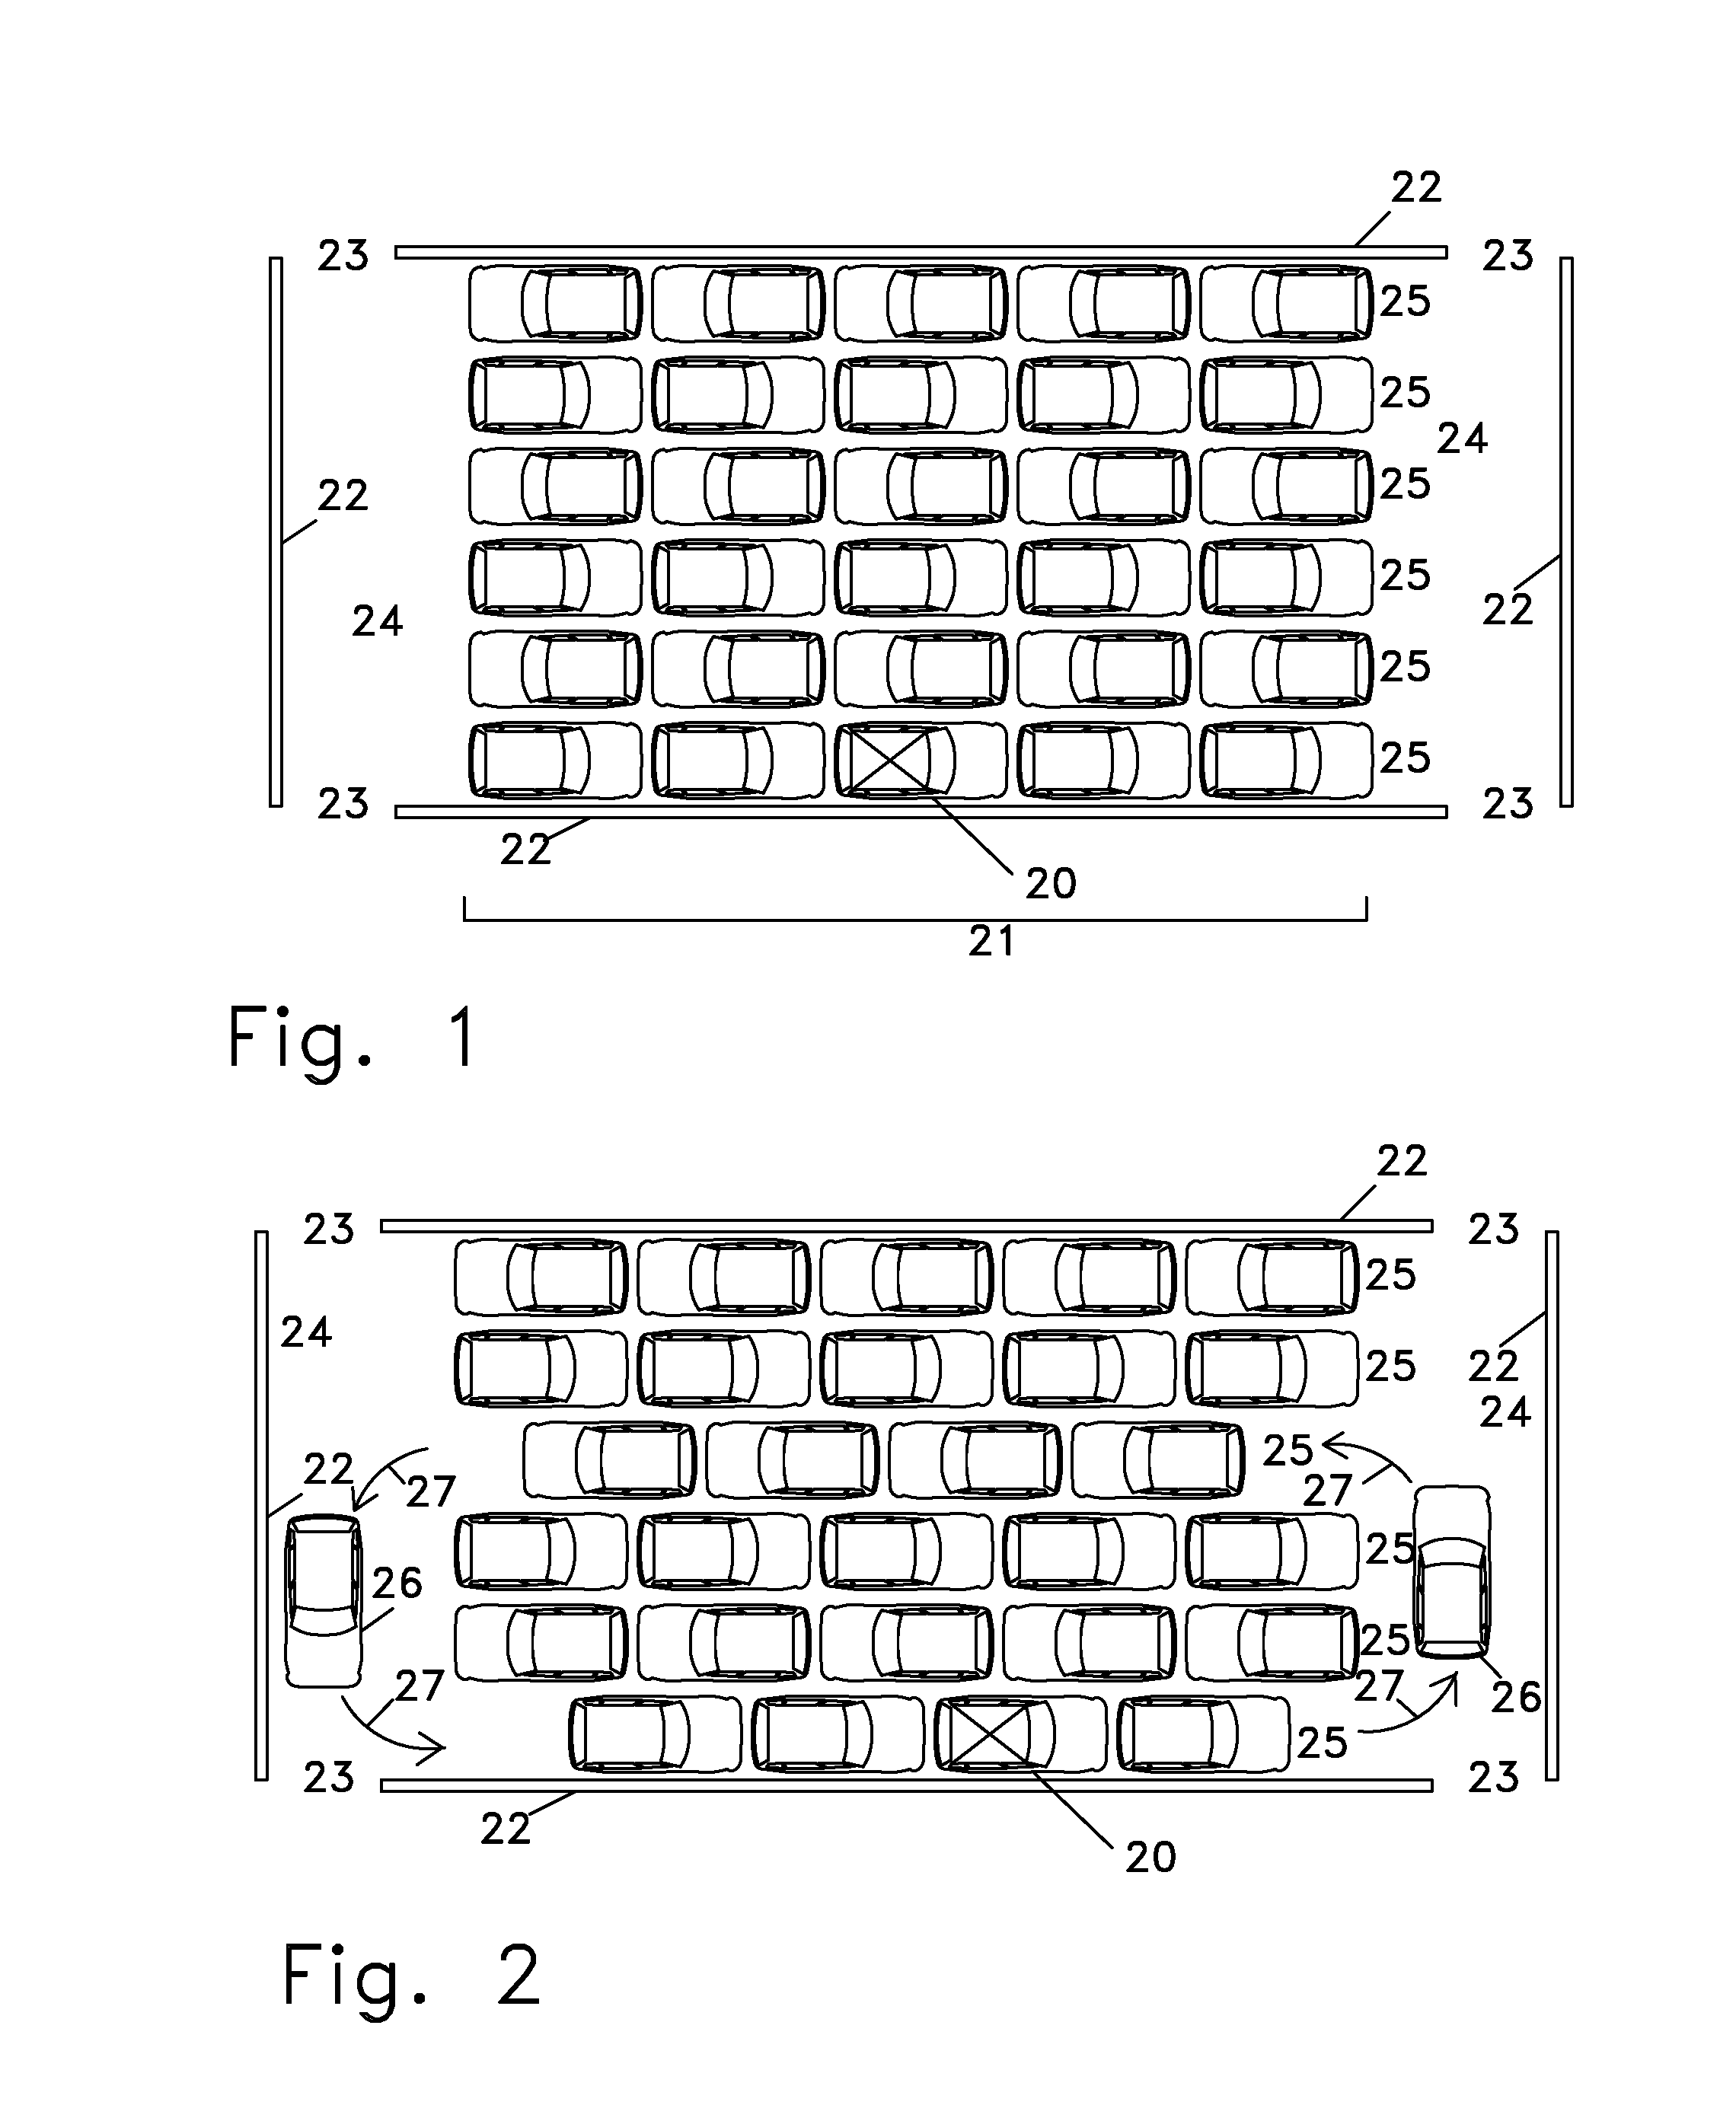 Methods to operate autonomous vehicles to pilot vehicles in groups or convoys